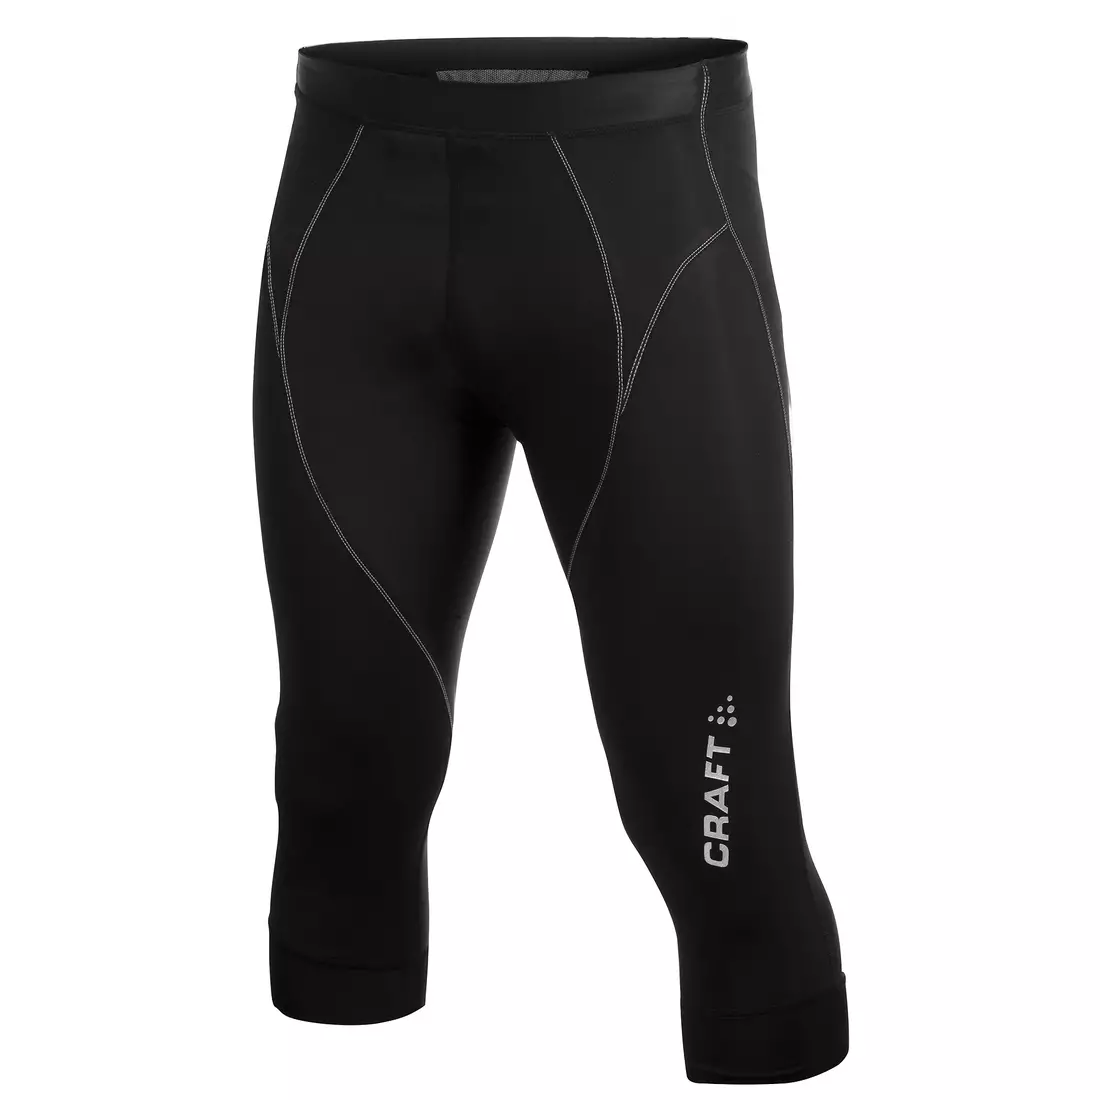 CRAFT Active Bike Knickers men's 3/4 cycling shorts 1901993-9900